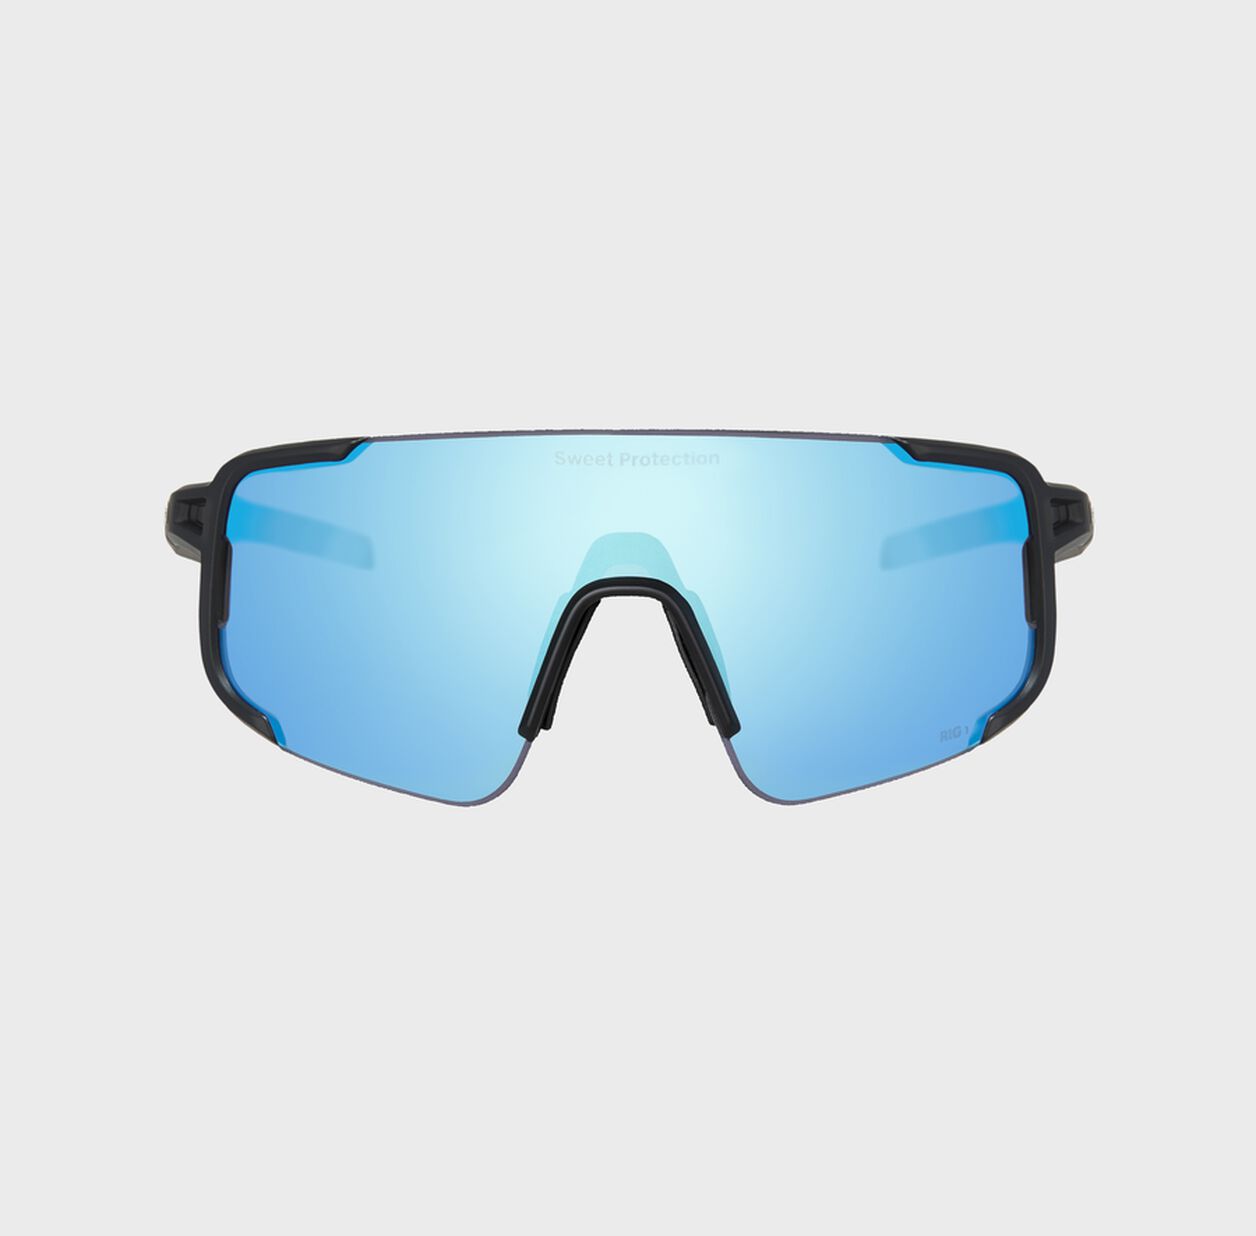 Sweet Protection - Lunettes Ronin RIG Reflect Matte Crystal Black Lunettes Sweet Protection 